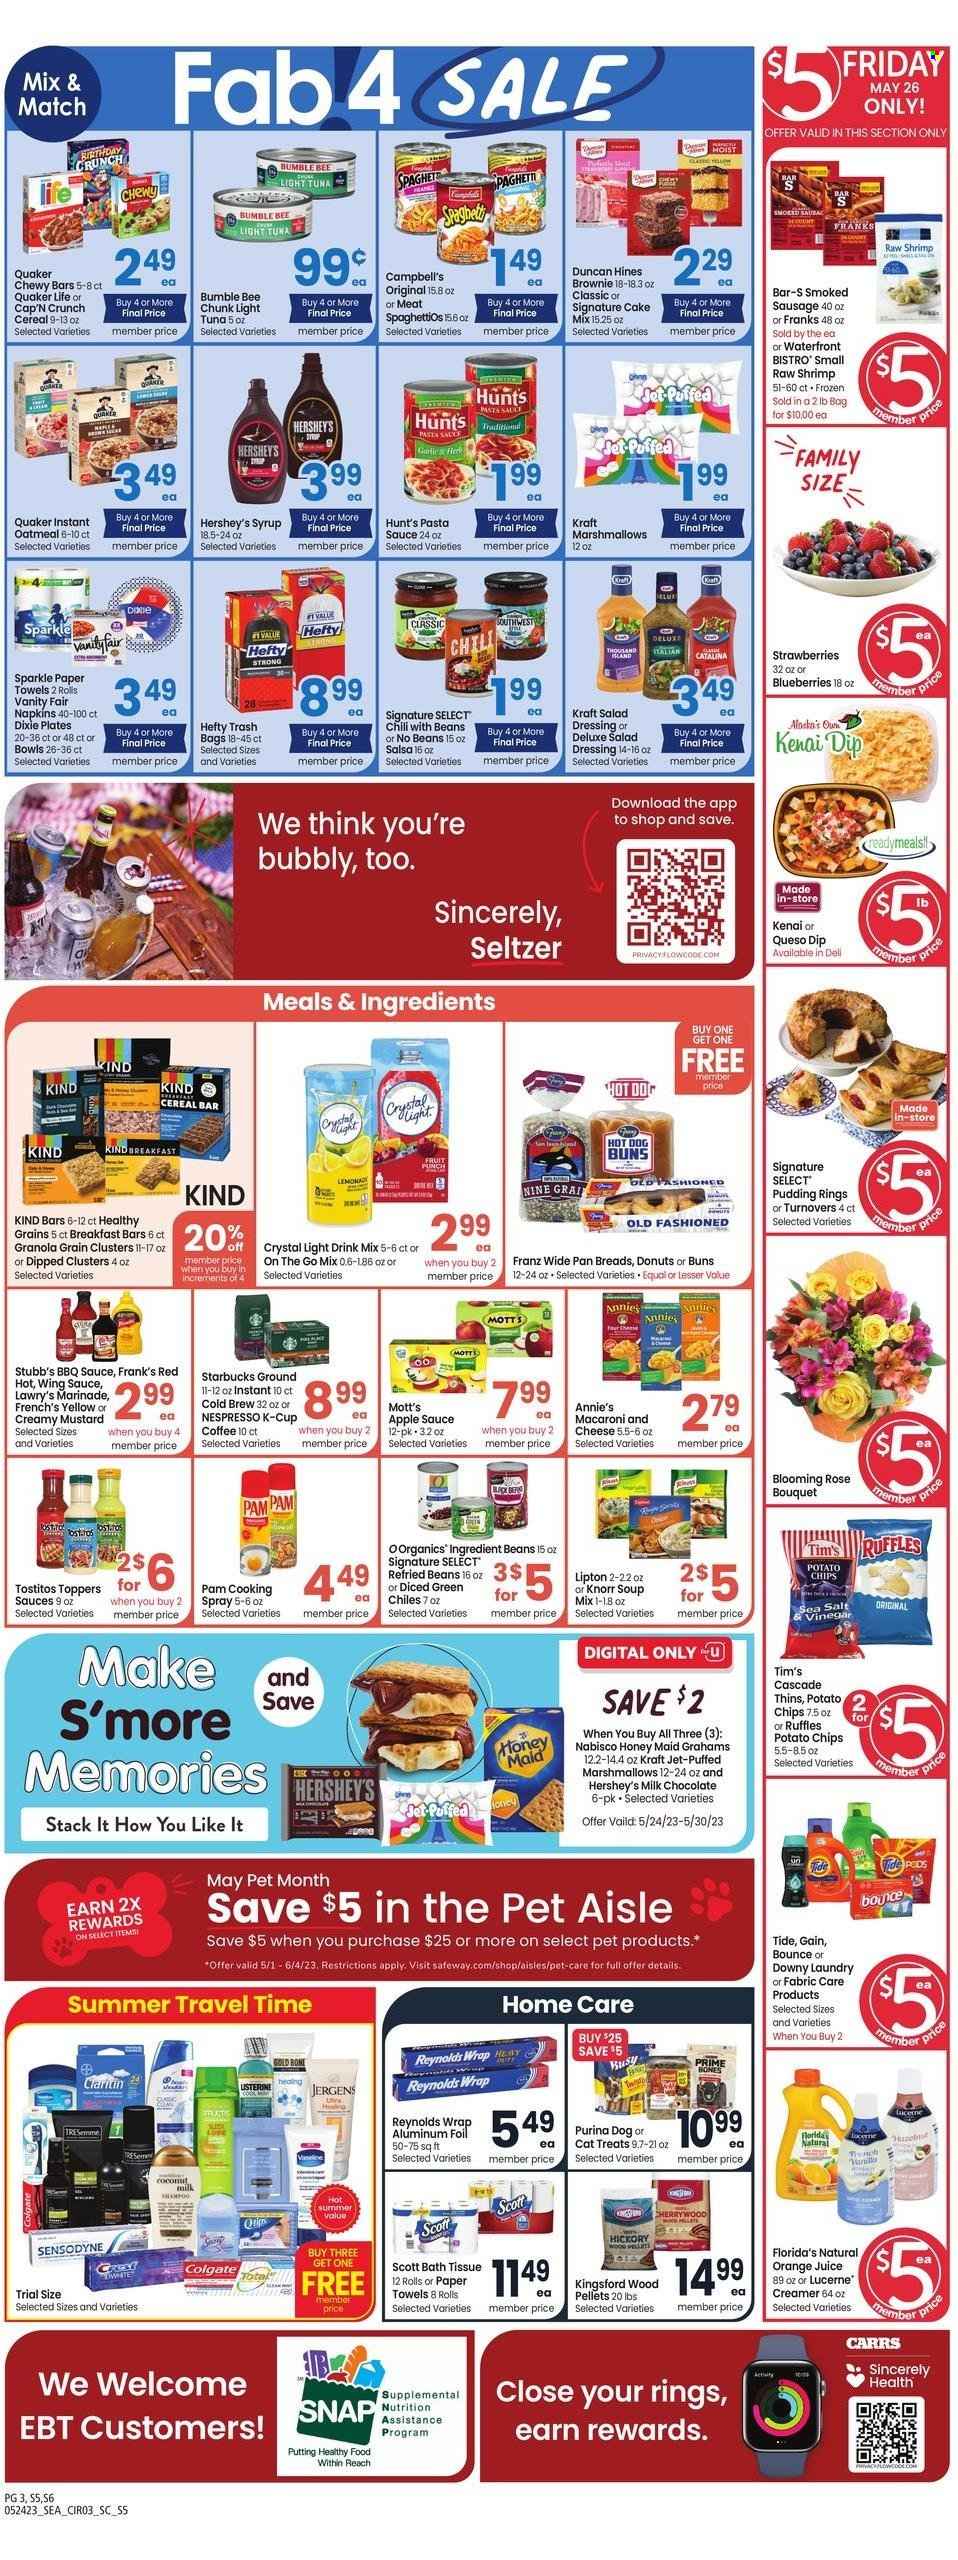 thumbnail - Safeway Flyer - 05/24/2023 - 05/30/2023 - Sales products - buns, turnovers, brownies, donut, Mott's, tuna, shrimps, Campbell's, macaroni & cheese, pasta sauce, soup mix, soup, Bumble Bee, Knorr, Quaker, Annie's, Kraft®, Kingsford, sausage, smoked sausage, frankfurters, pudding, creamer, Hershey's, marshmallows, milk chocolate, cereal bar, Florida's Natural, Nabisco, potato chips, Thins, Ruffles, Tostitos, oatmeal, refried beans, light tuna, cereals, granola, Cap'n Crunch, Honey Maid, BBQ sauce, mustard, salad dressing, dressing, salsa, marinade, wing sauce, cooking spray, apple sauce, syrup, orange juice, juice, Lipton, seltzer water, coffee, Starbucks, Nespresso, coffee capsules, K-Cups, punch, bath tissue, Scott, napkins, kitchen towels, paper towels, Gain, Cascade, Tide, Fab, XTRA, Downy Laundry, Jet, Colgate, Listerine, Sensodyne, Crest, TRESemmé, Jergens, Hefty, trash bags, plate, pan, aluminium foil, Dixie, Purina, Bumblebee, bouquet, rose, Claritin. Page 3.